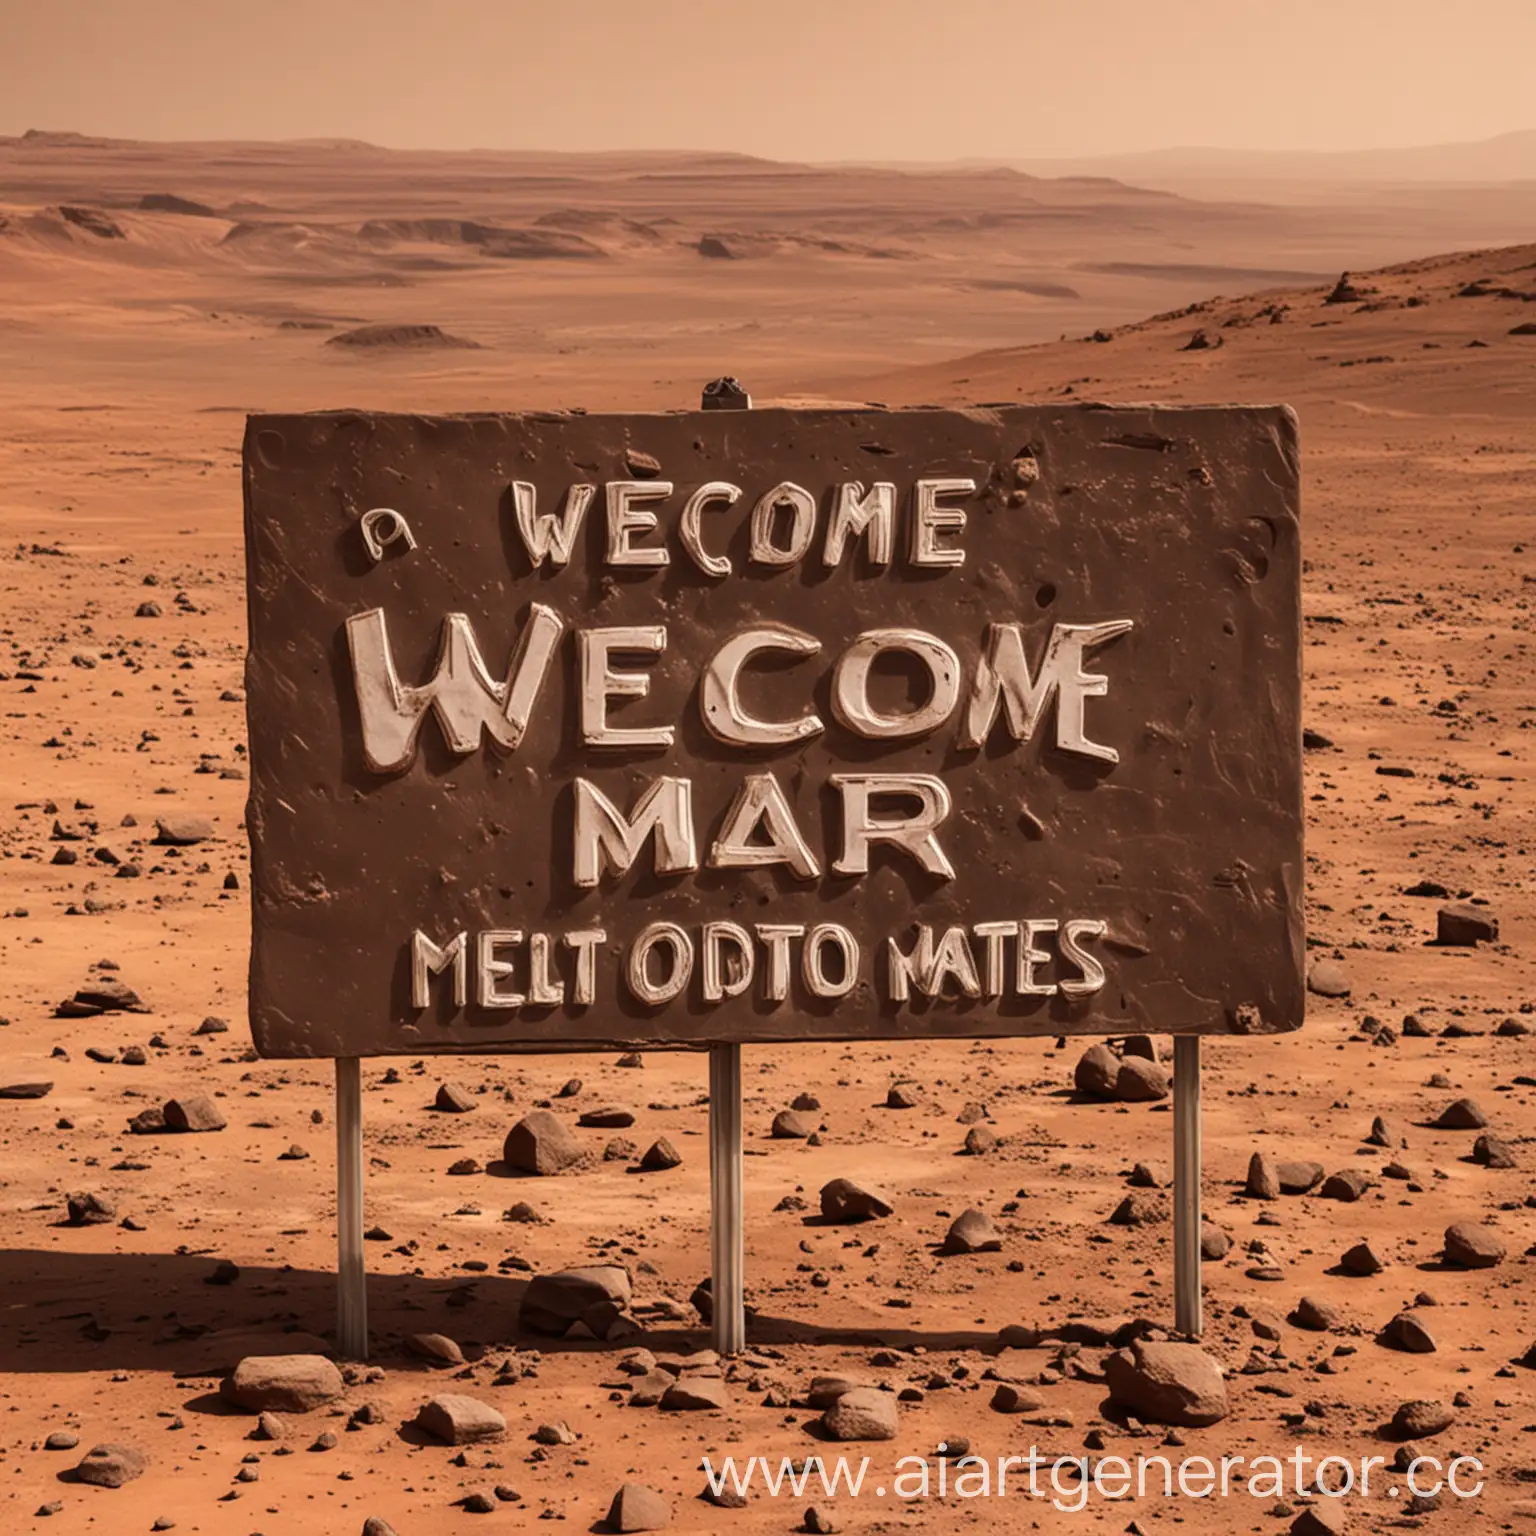 Welcoming-Sign-on-Mars-Intergalactic-Greeting-to-New-Frontier-Explorers